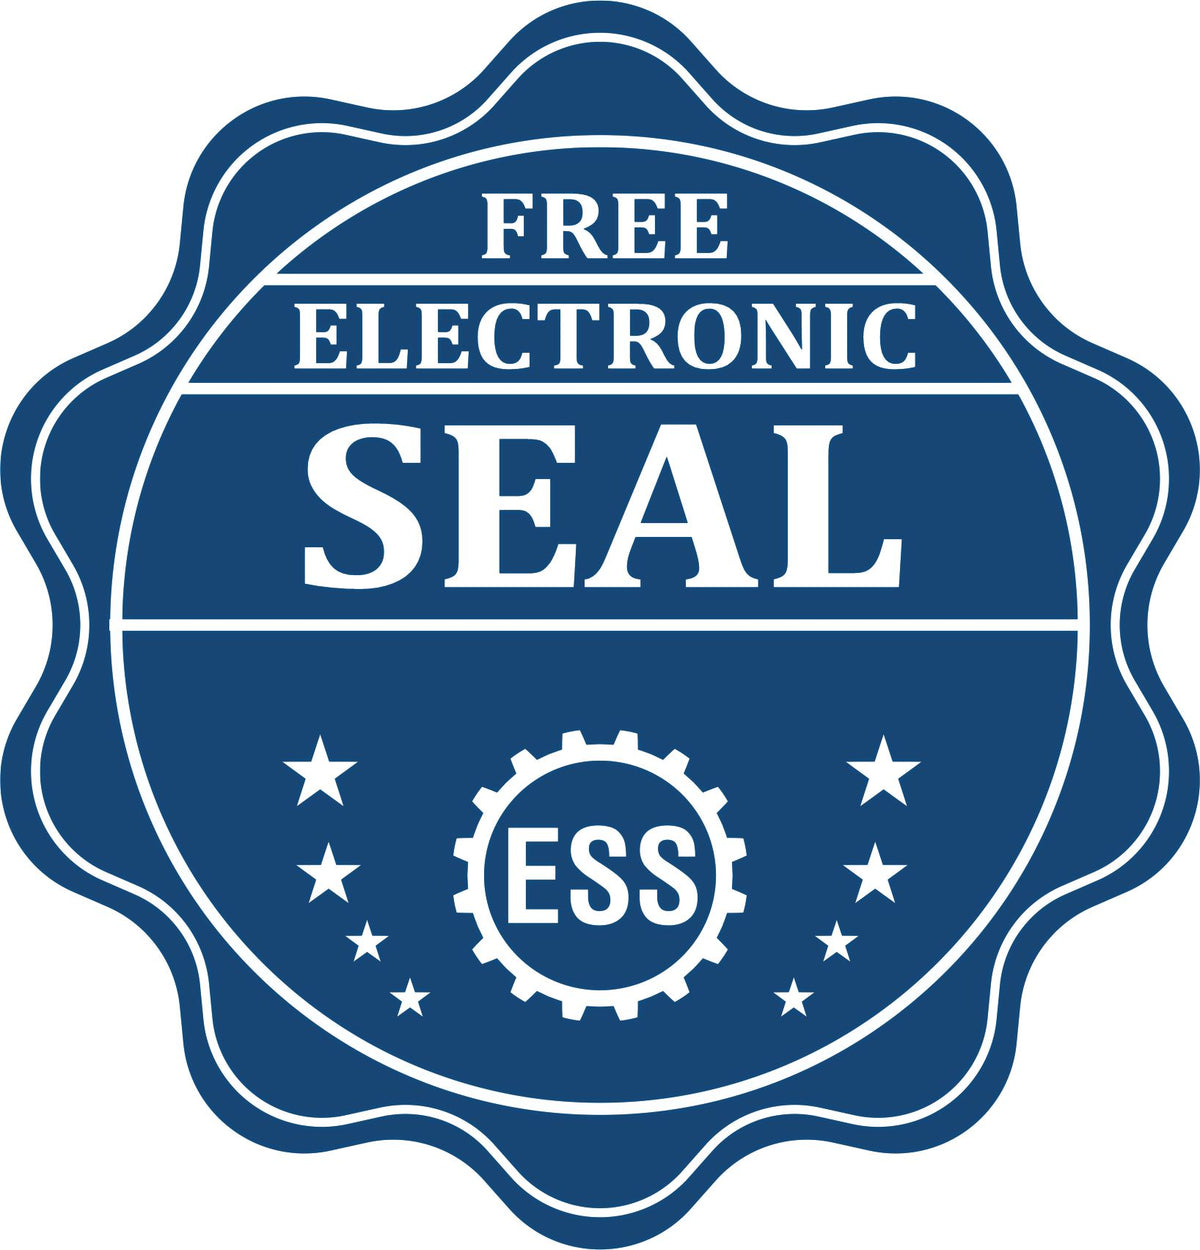 A badge showing a free electronic seal for the Gift Maryland Architect Seal with stars and the ESS gear on the emblem.